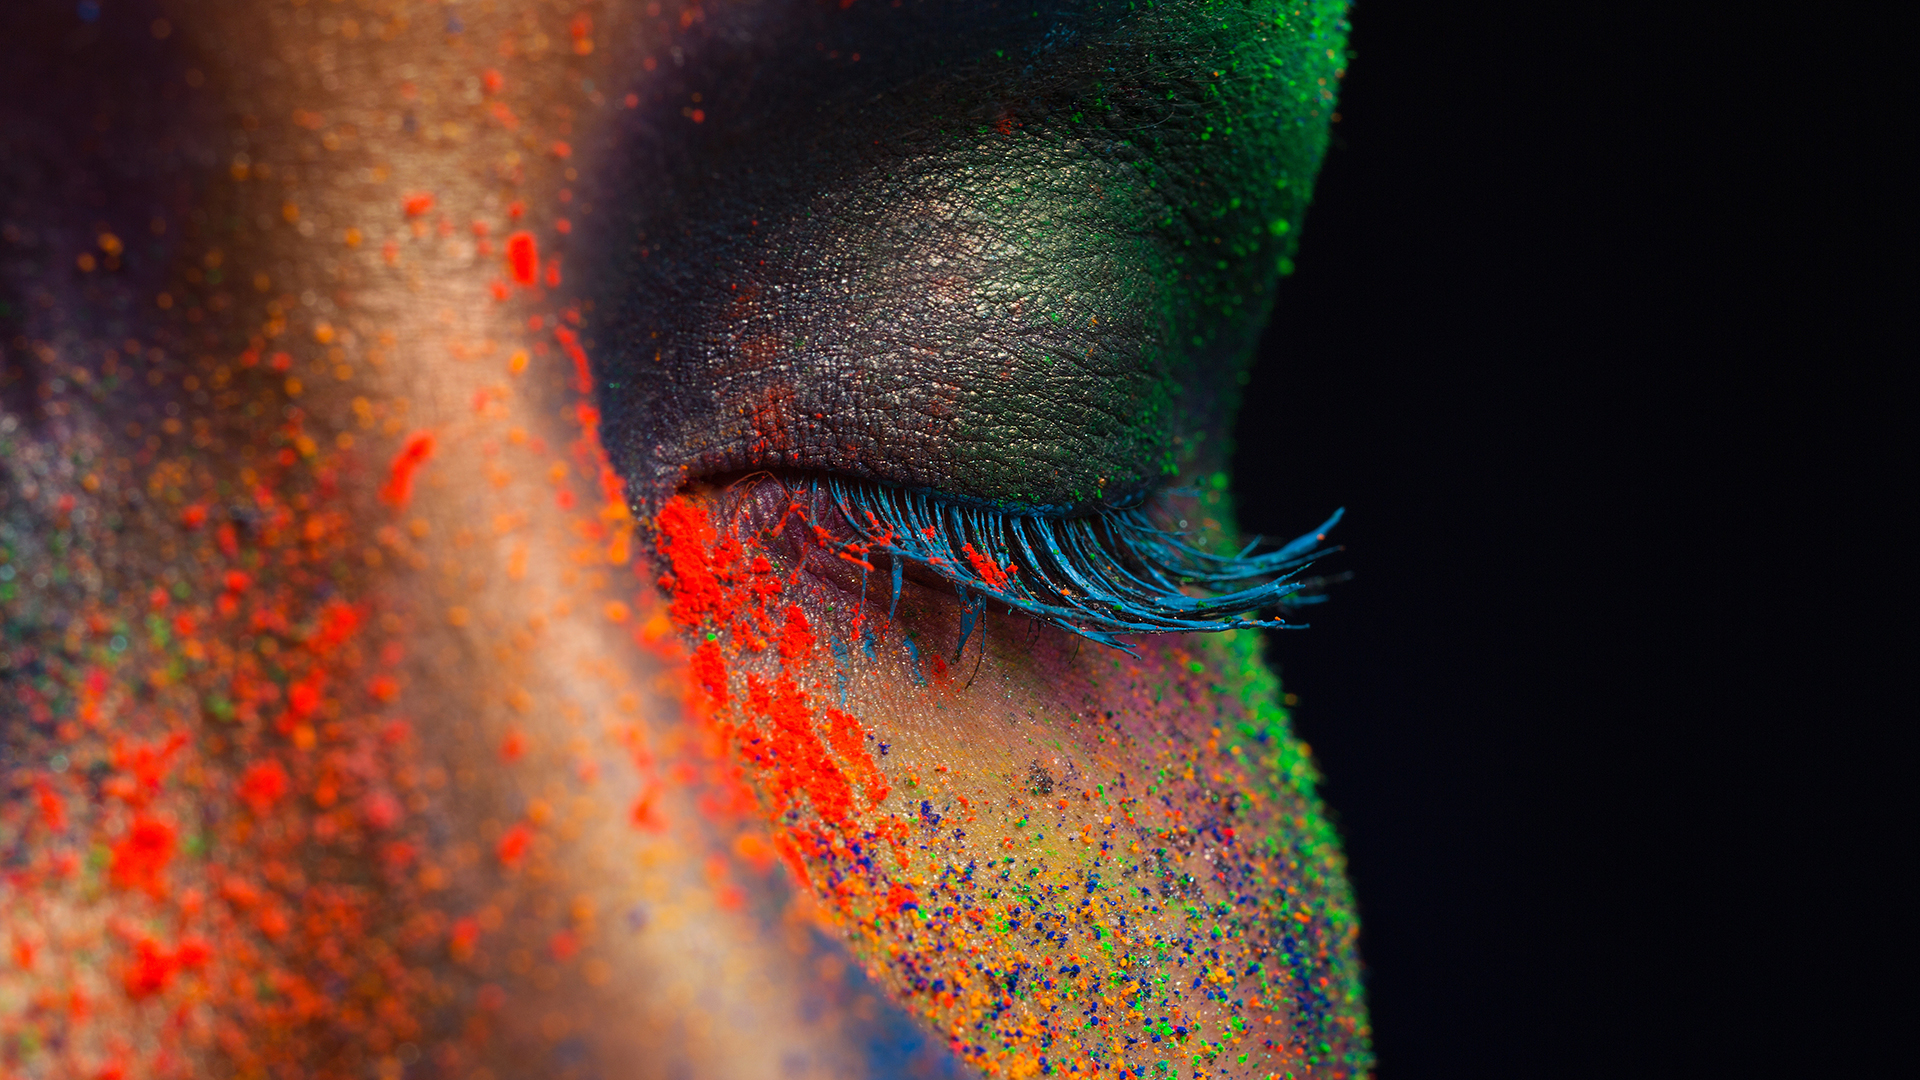 Eye of model with colorful art make-up, close-up